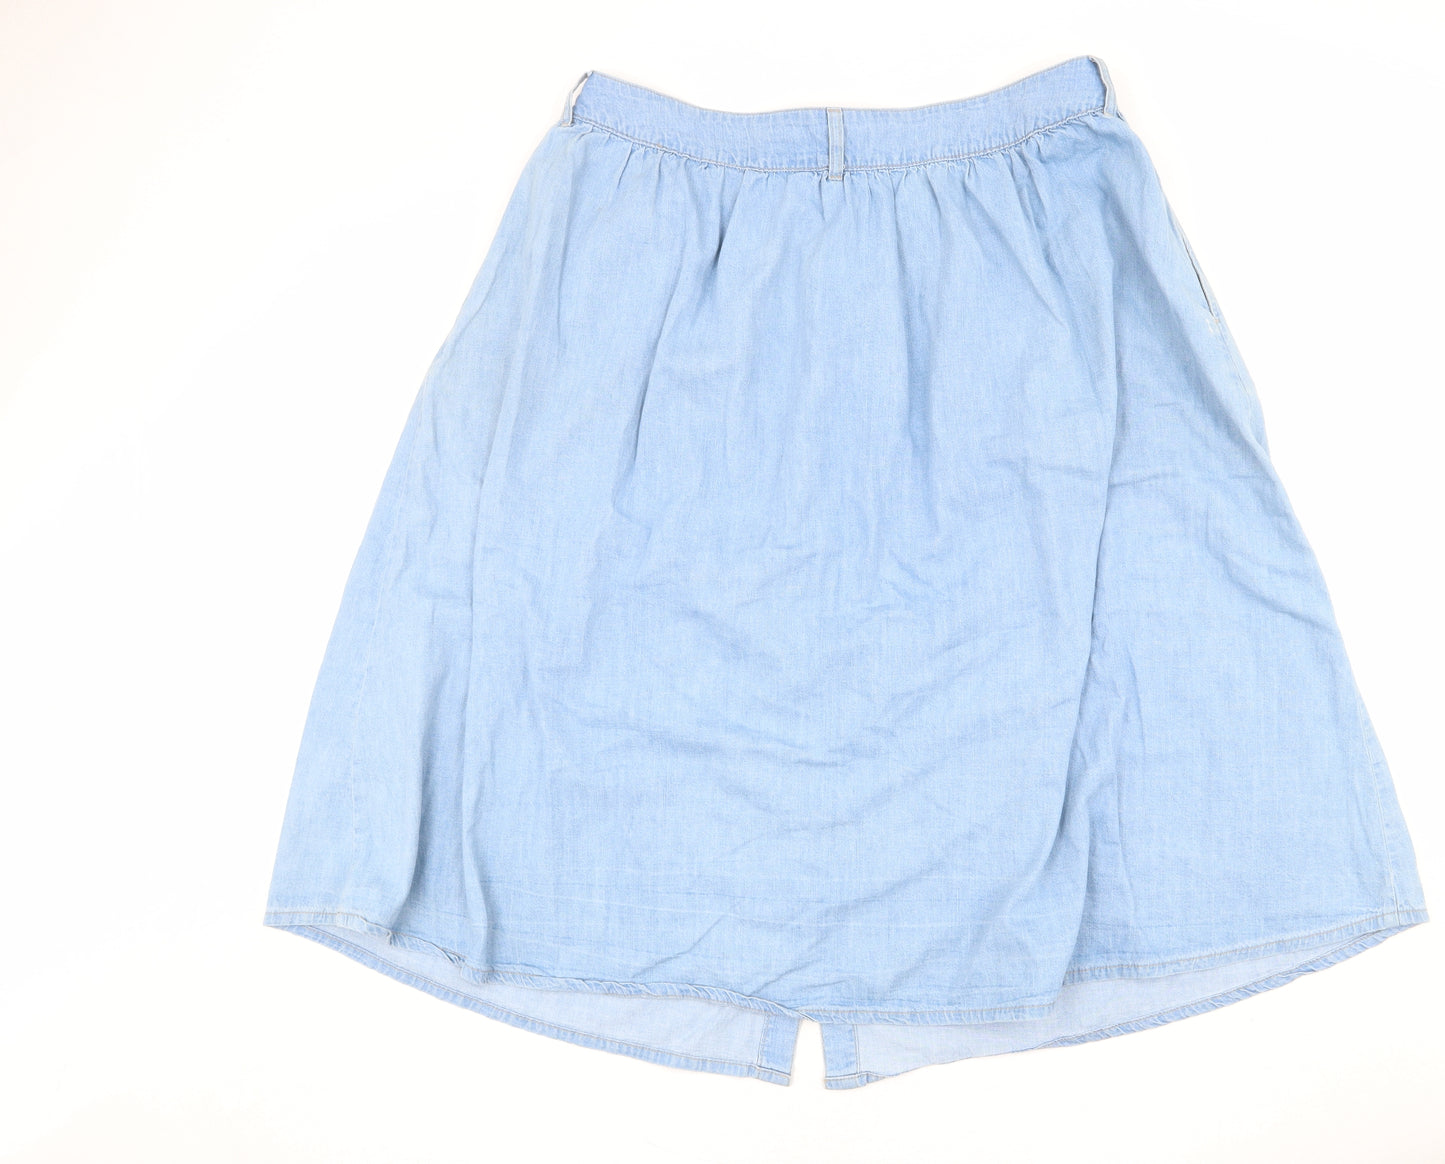 Crew Clothing Womens Blue Cotton A-Line Skirt Size 18 Button